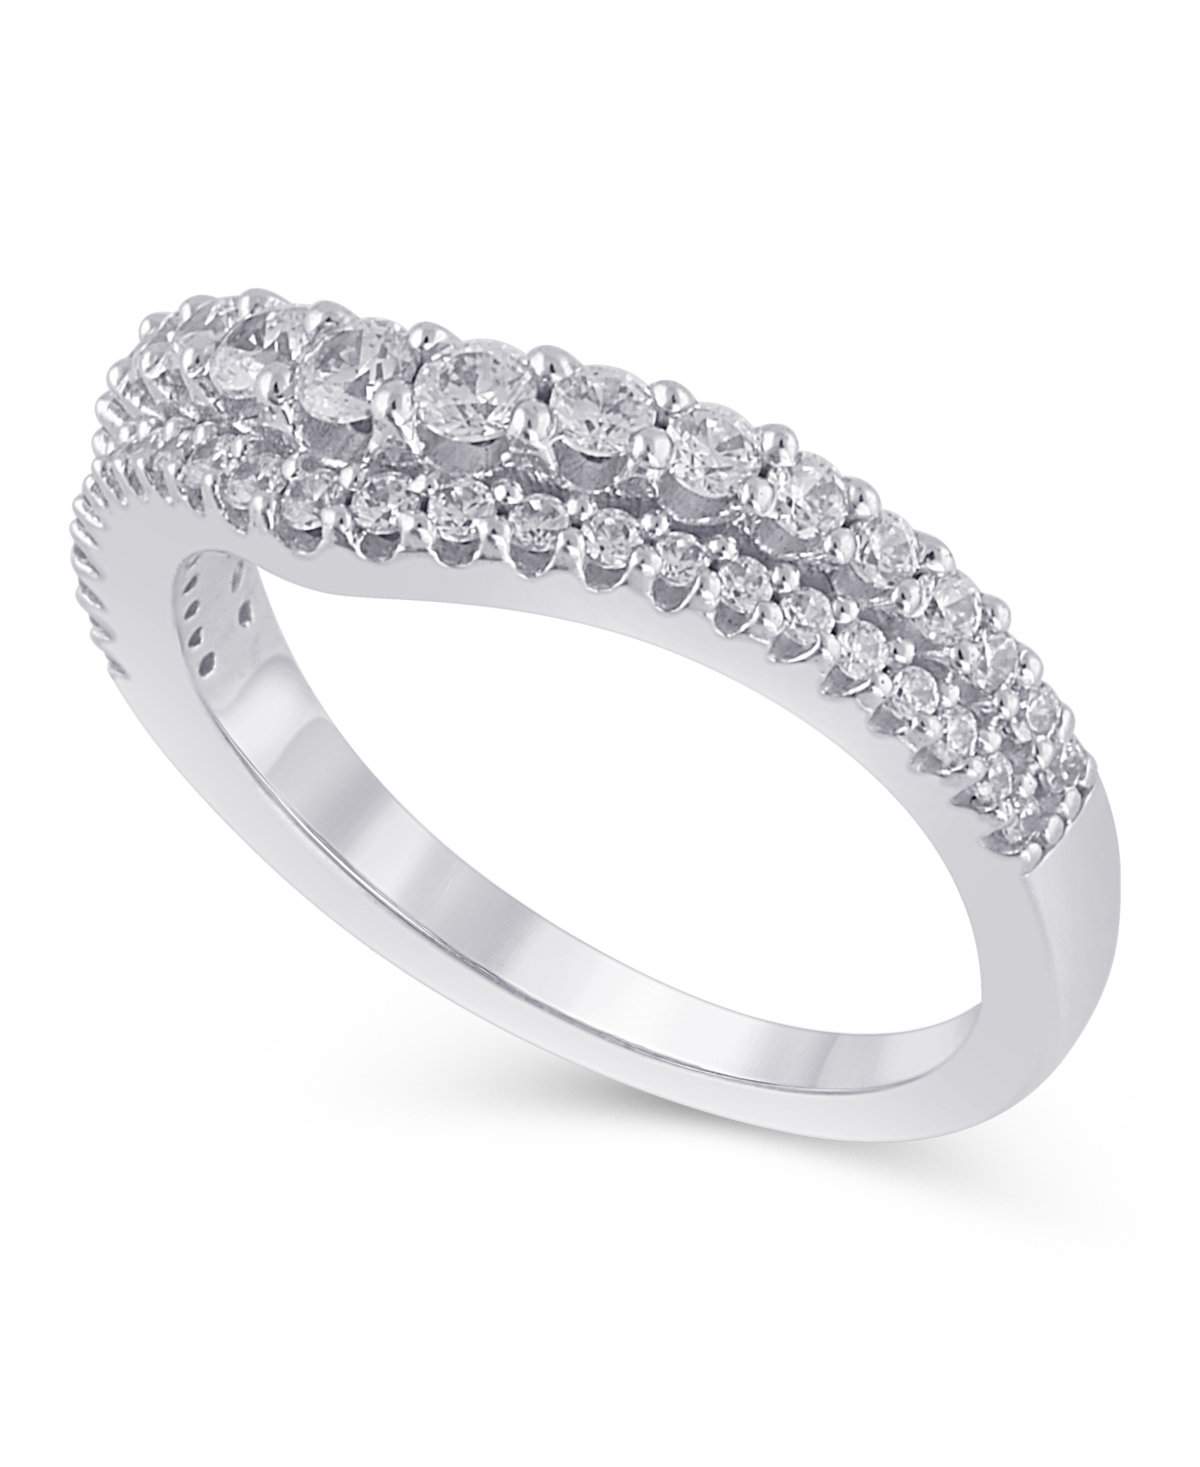 Certified Diamond (5/8 ct. t.w.) Contour Band in 14K White Gold - White Gold